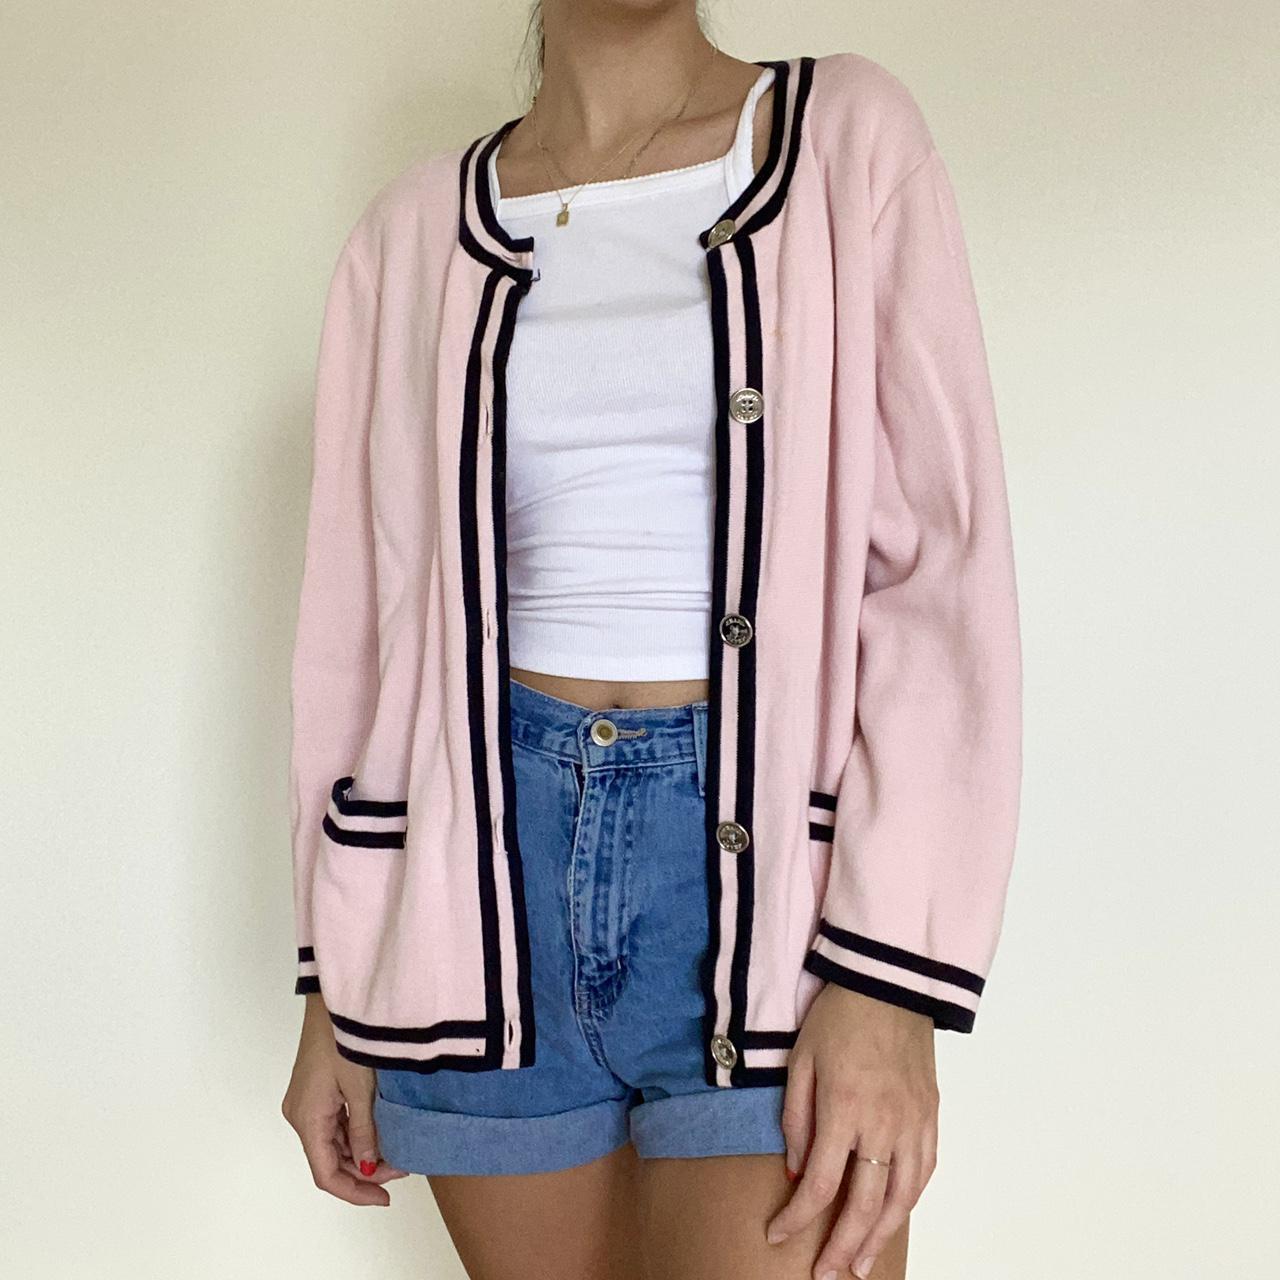 Chaps Women's Pink and Navy Cardigan